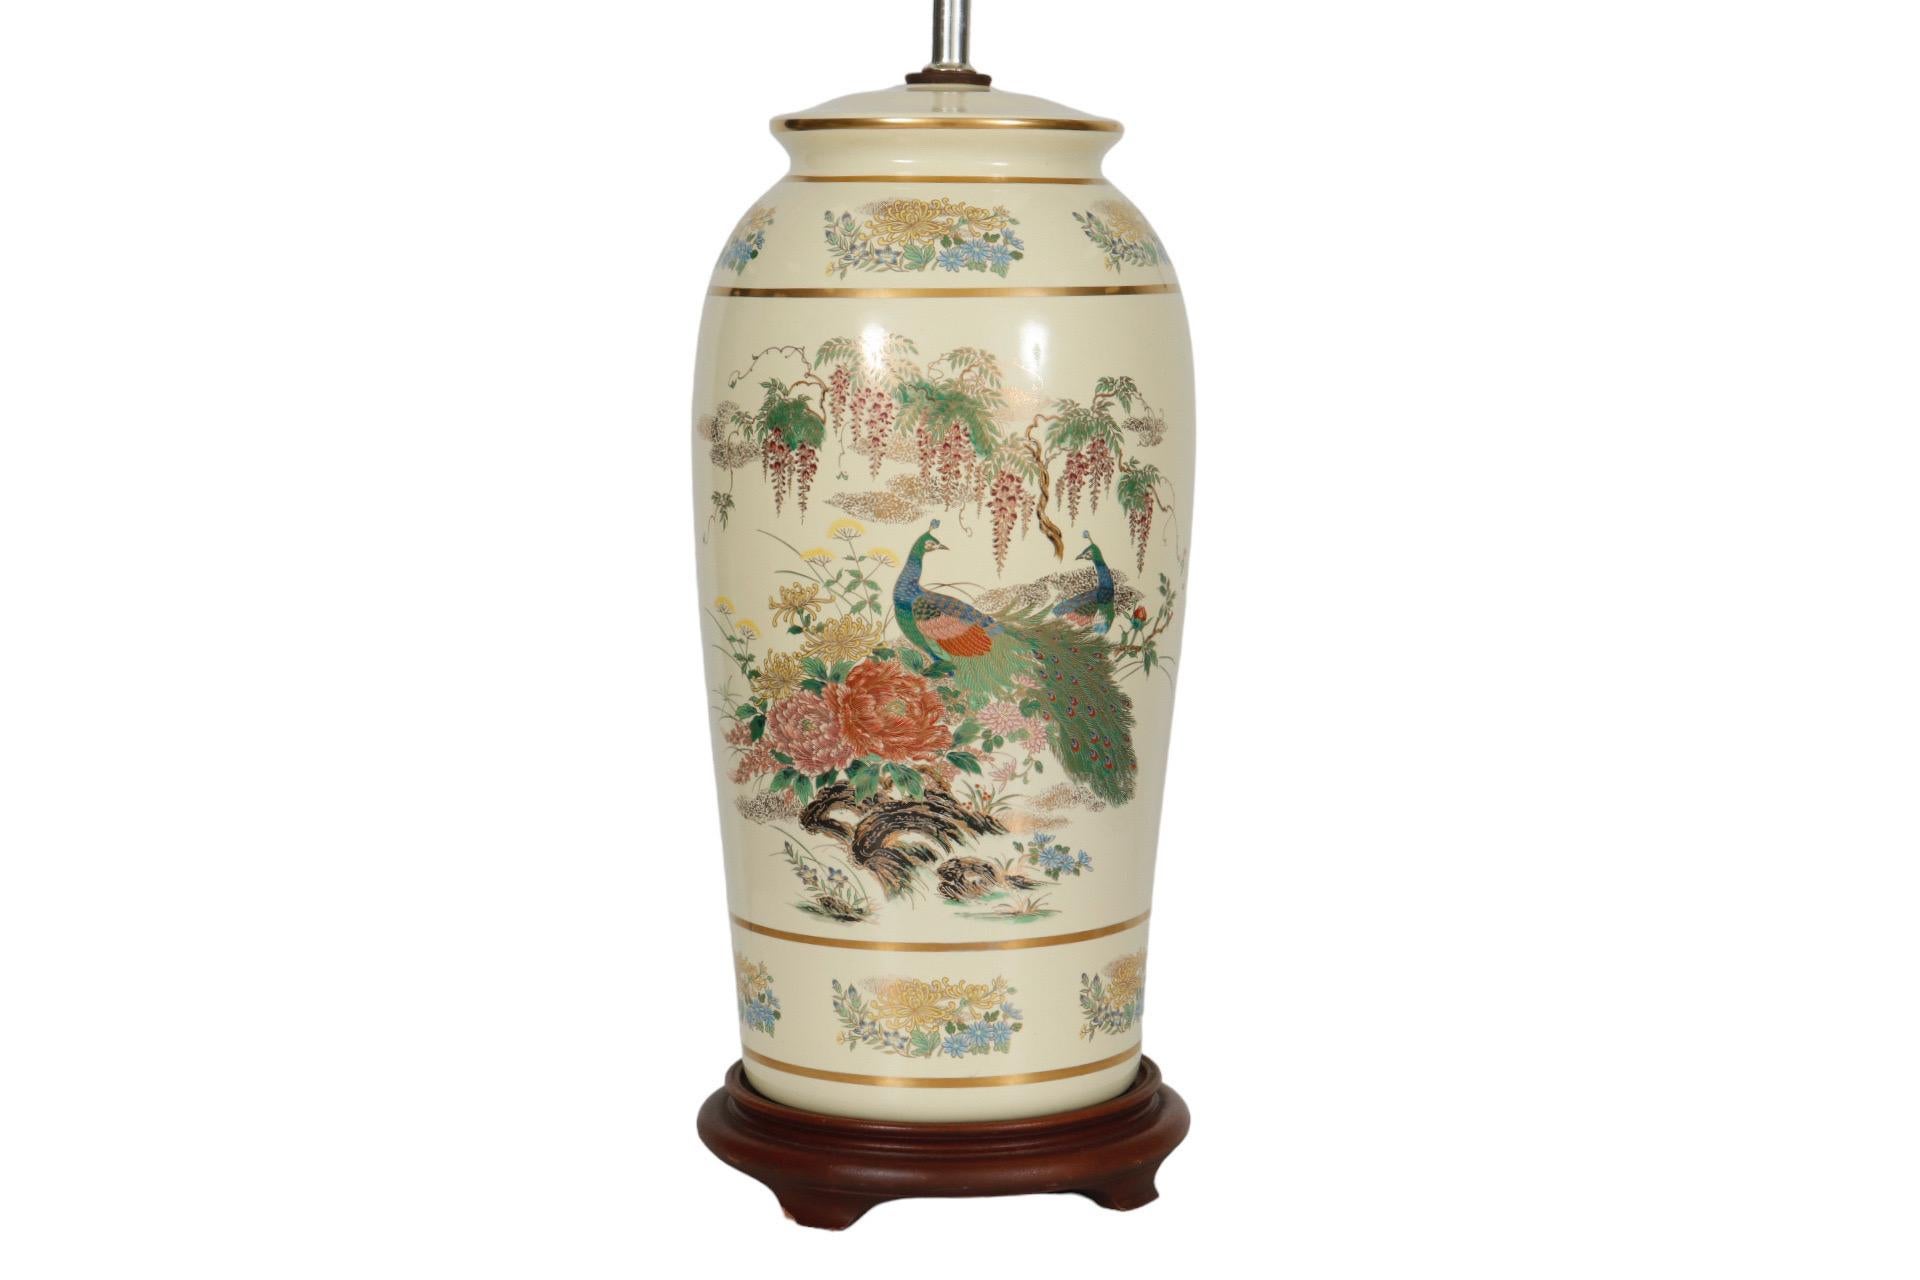 A Japanese style porcelain table lamp mounted on a brown beveled base. Richly painted with colorful peacocks and blossoms overlaid with gold. Topped with a brass finial pierced with a geometric motif. Wired and in working condition. Measures 22.25